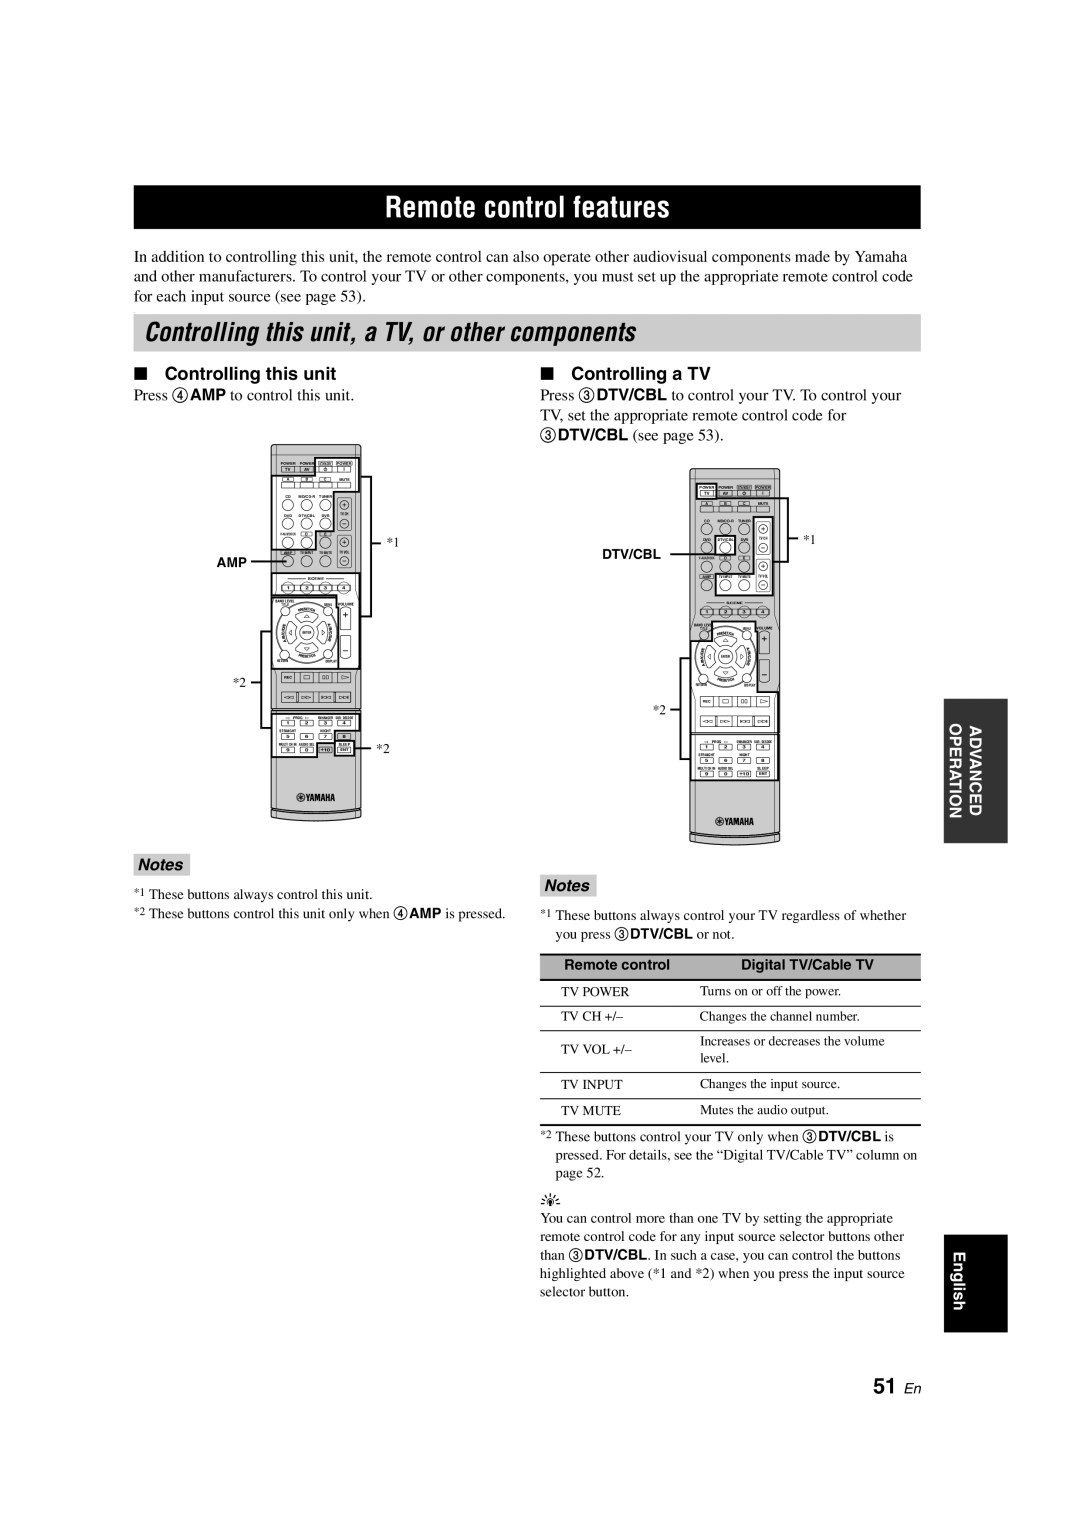 Yamaha HTR-6130 owner manual Remote control features, 51 En, Controlling this unit, Controlling a TV 